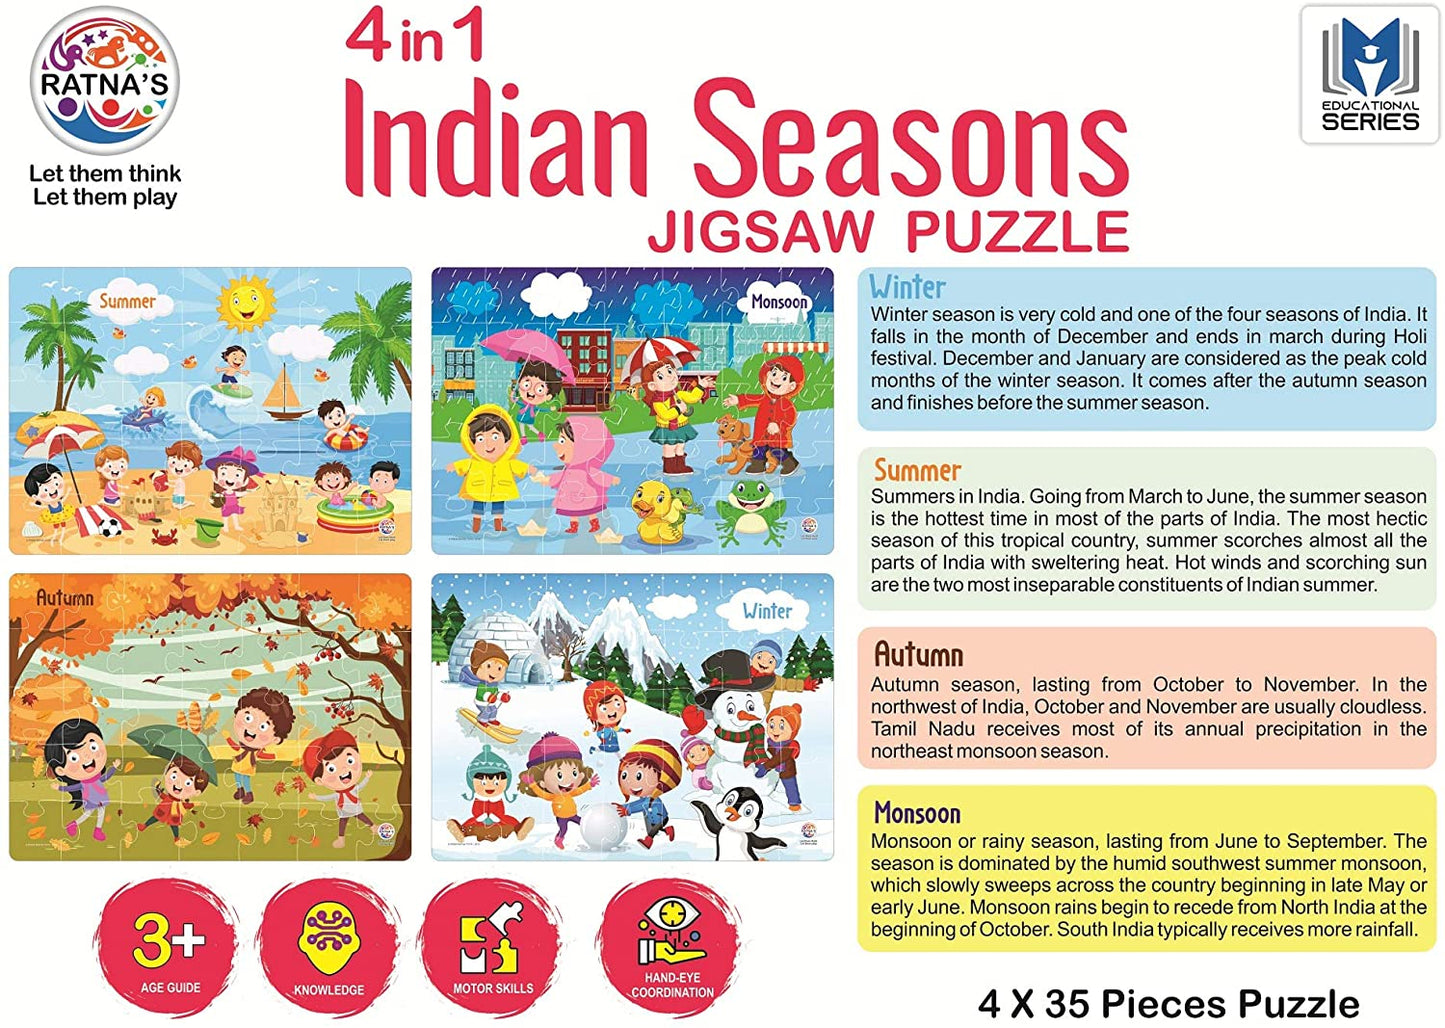 Ratna 4 in 1 Indian Seasons Jigsaw Puzzle (4 x 35 Pieces)